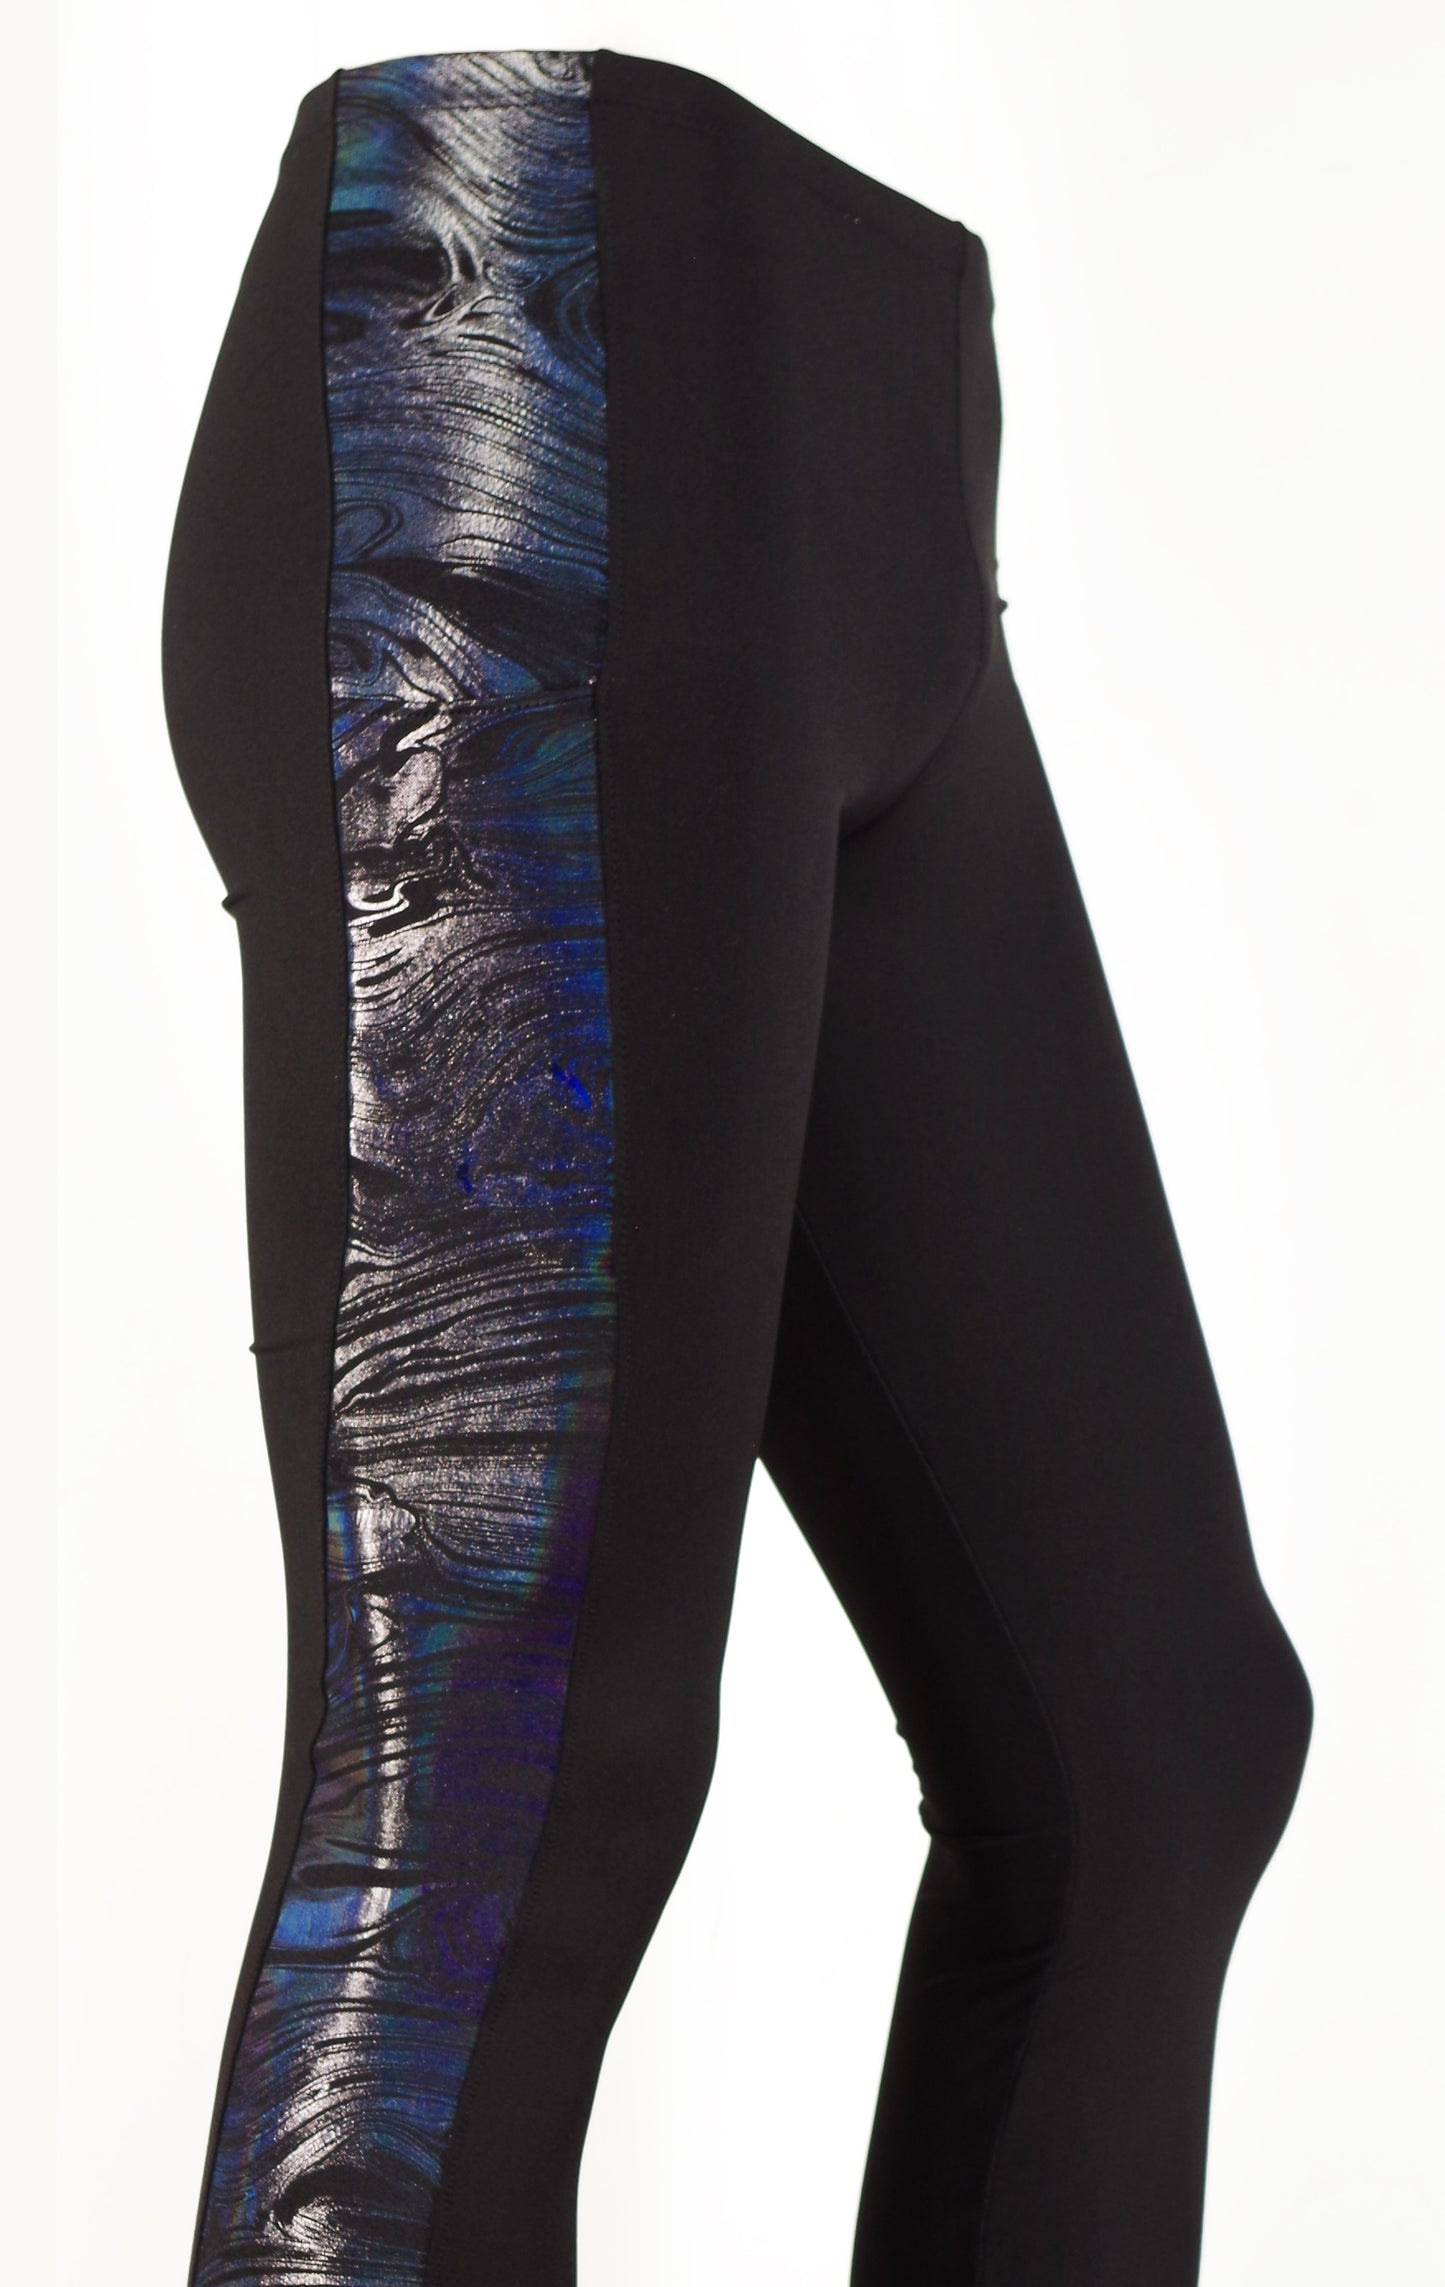 Meggings or Mens Running Tights with Iridescent Black Strip and Phone Pocket